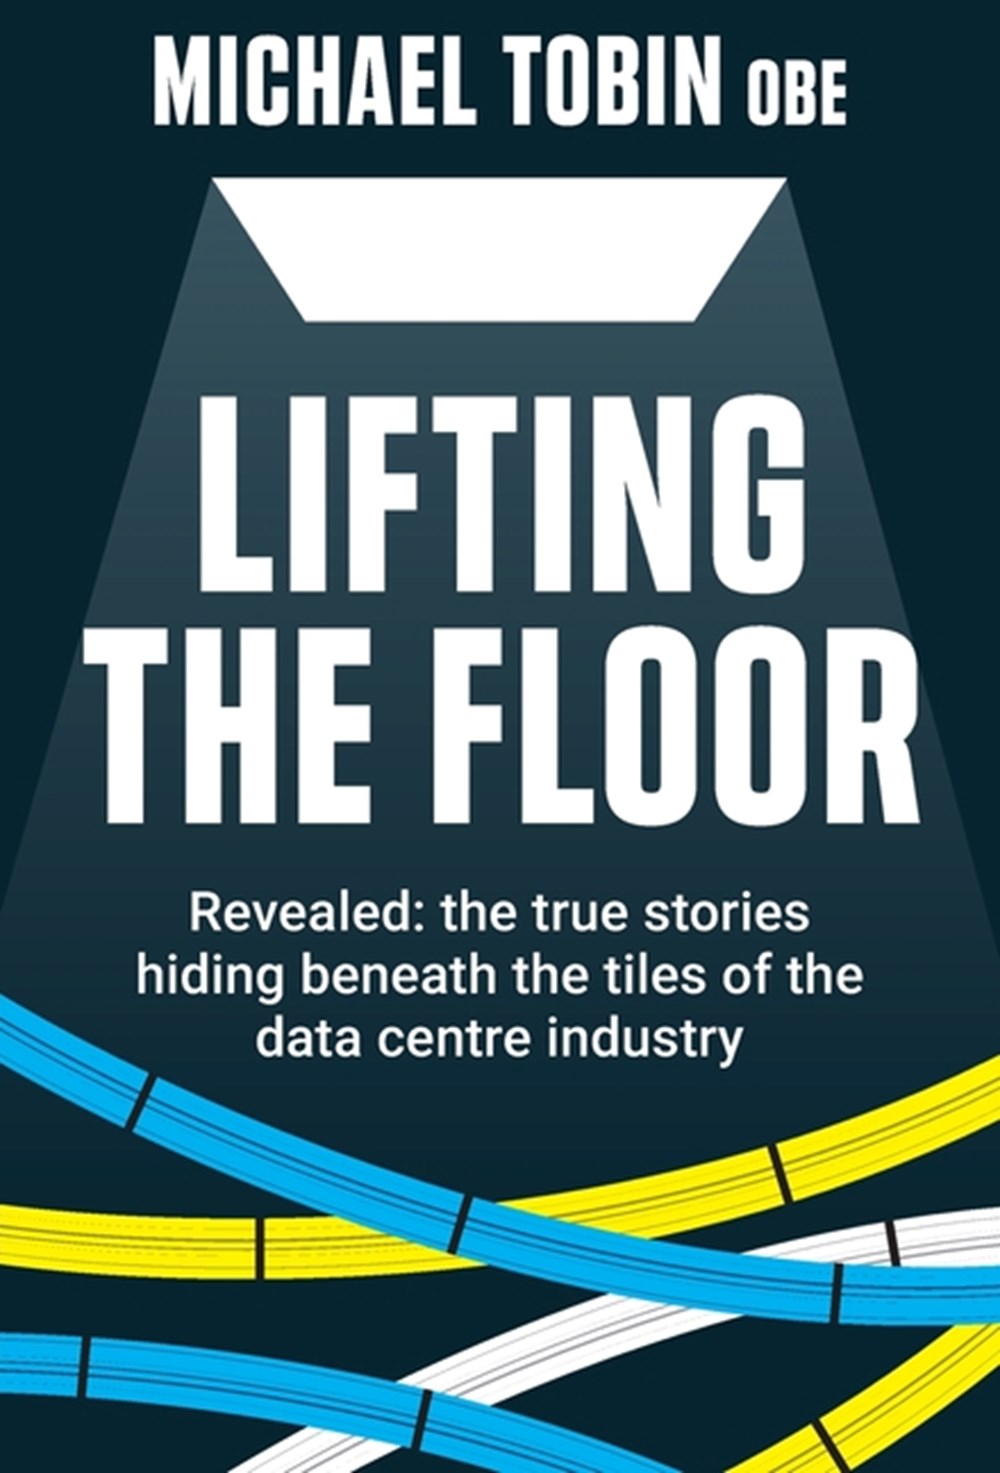 Lifting The Floor Revealed: the true stories hiding beneath the tiles of the data centre industry